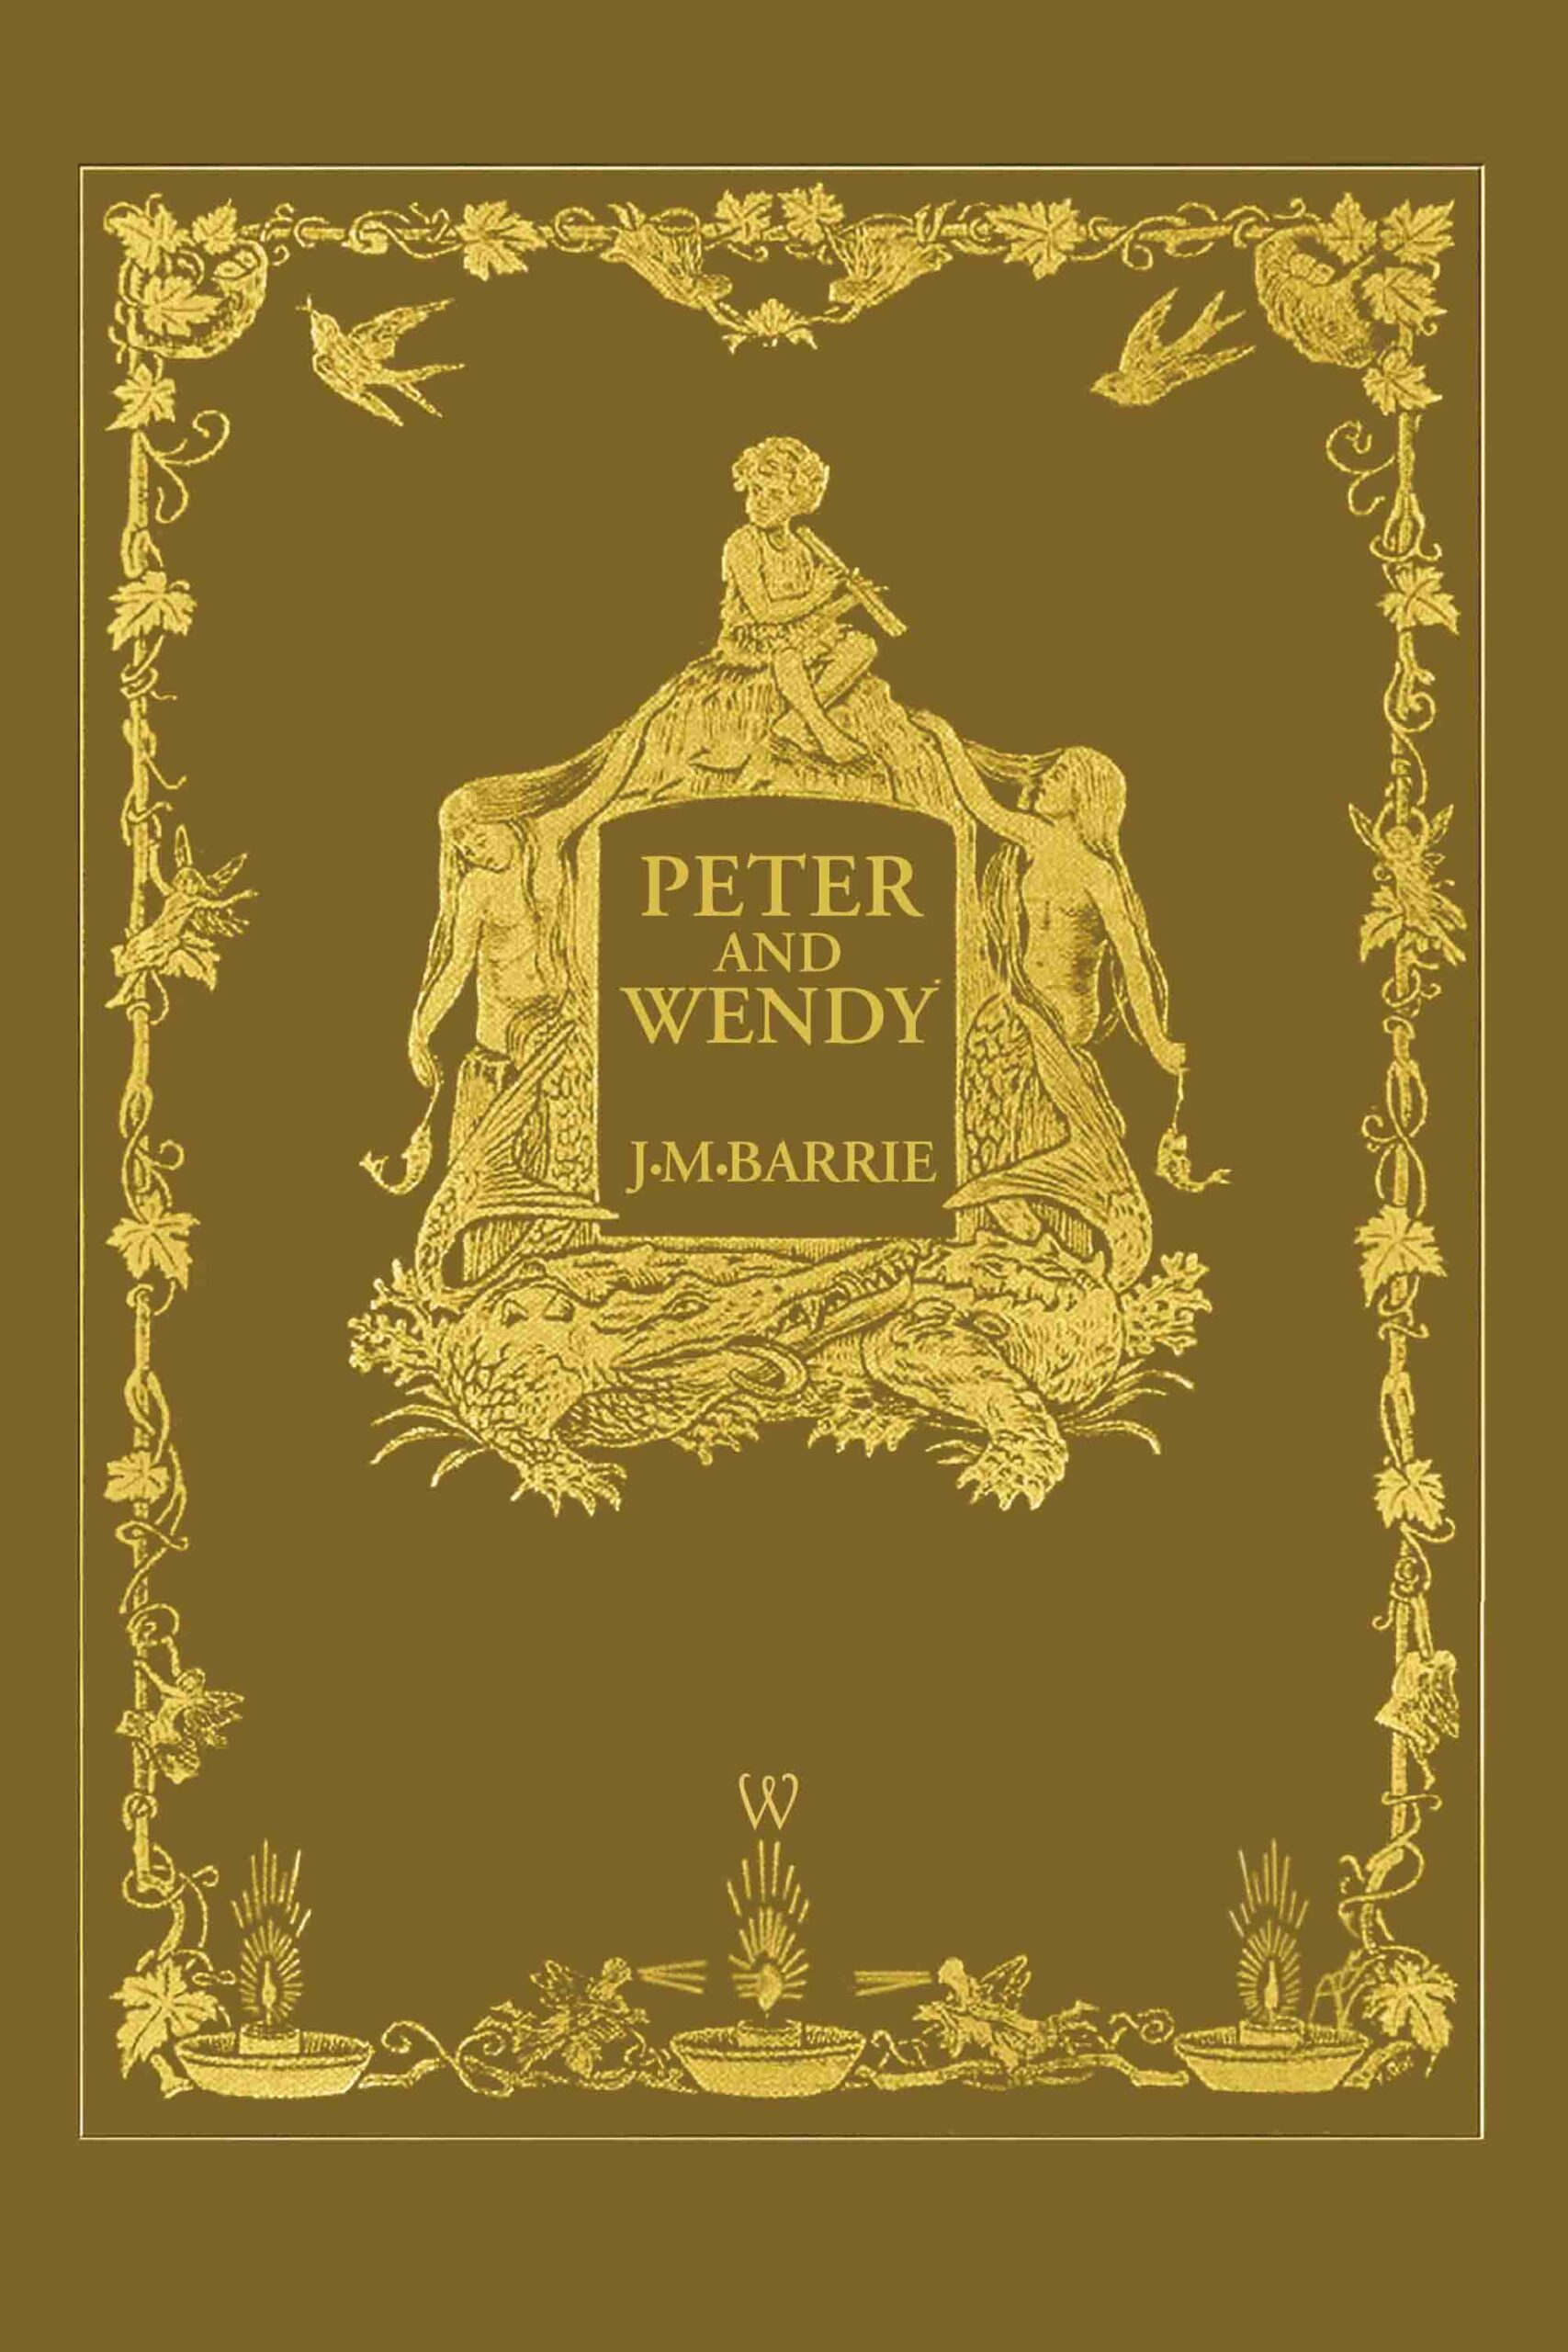 Peter and Wendy or Peter Pan (Wisehouse Classics Anniversary Edition of 1911 – with 13 riginal illustrations)